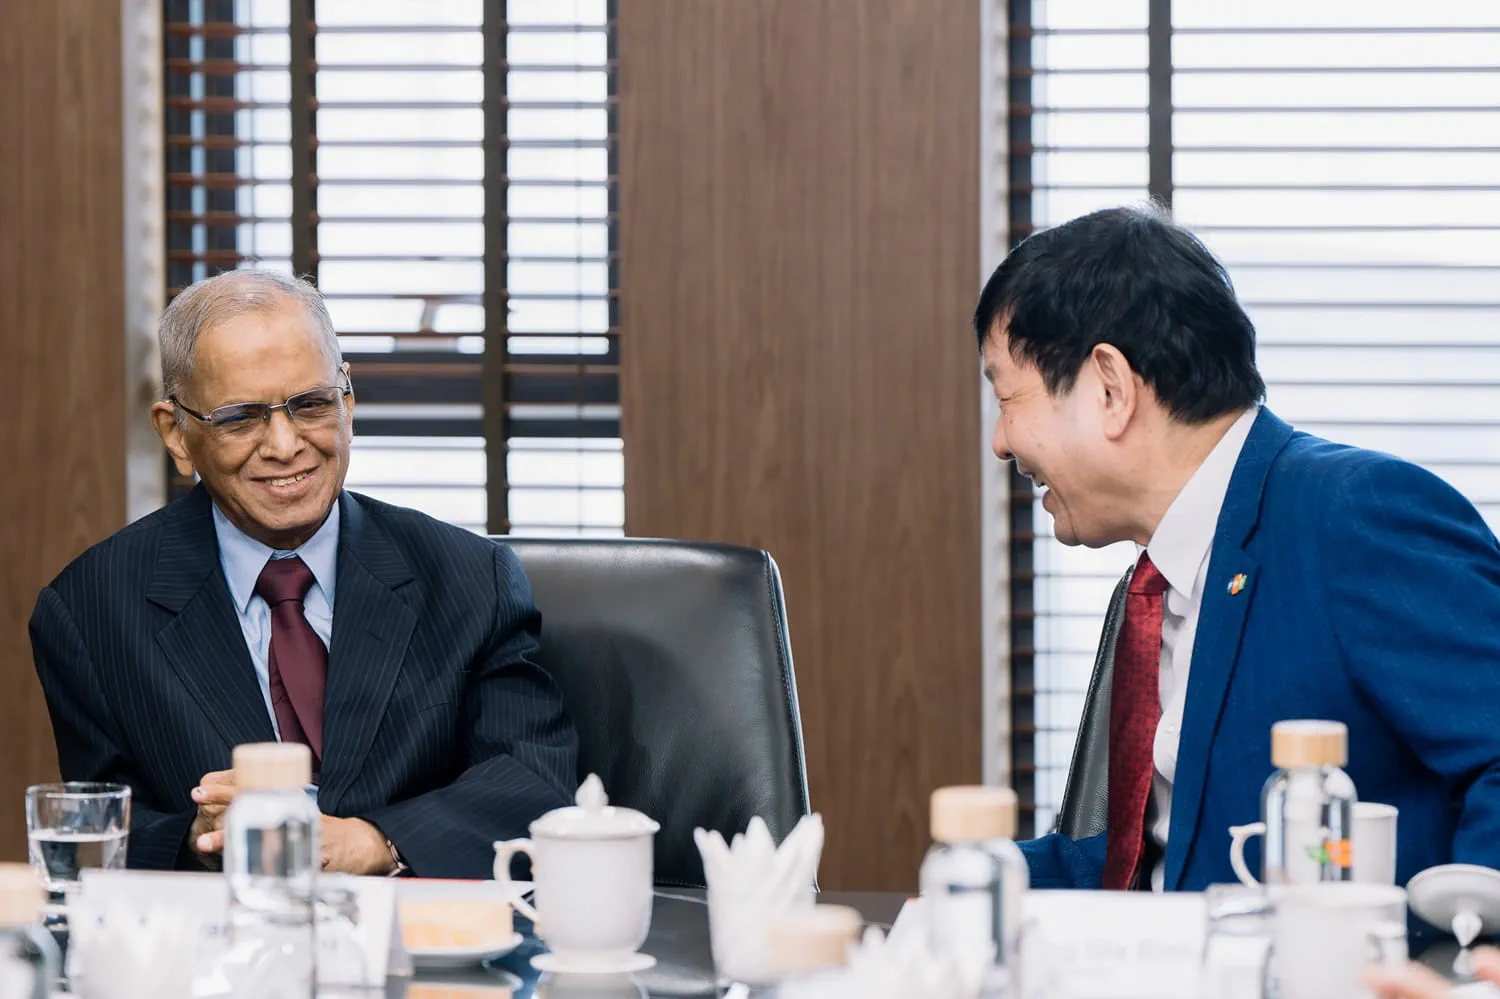 Mr. Narayana Murthy and Mr. Truong Gia Binh exchanged business perspectives